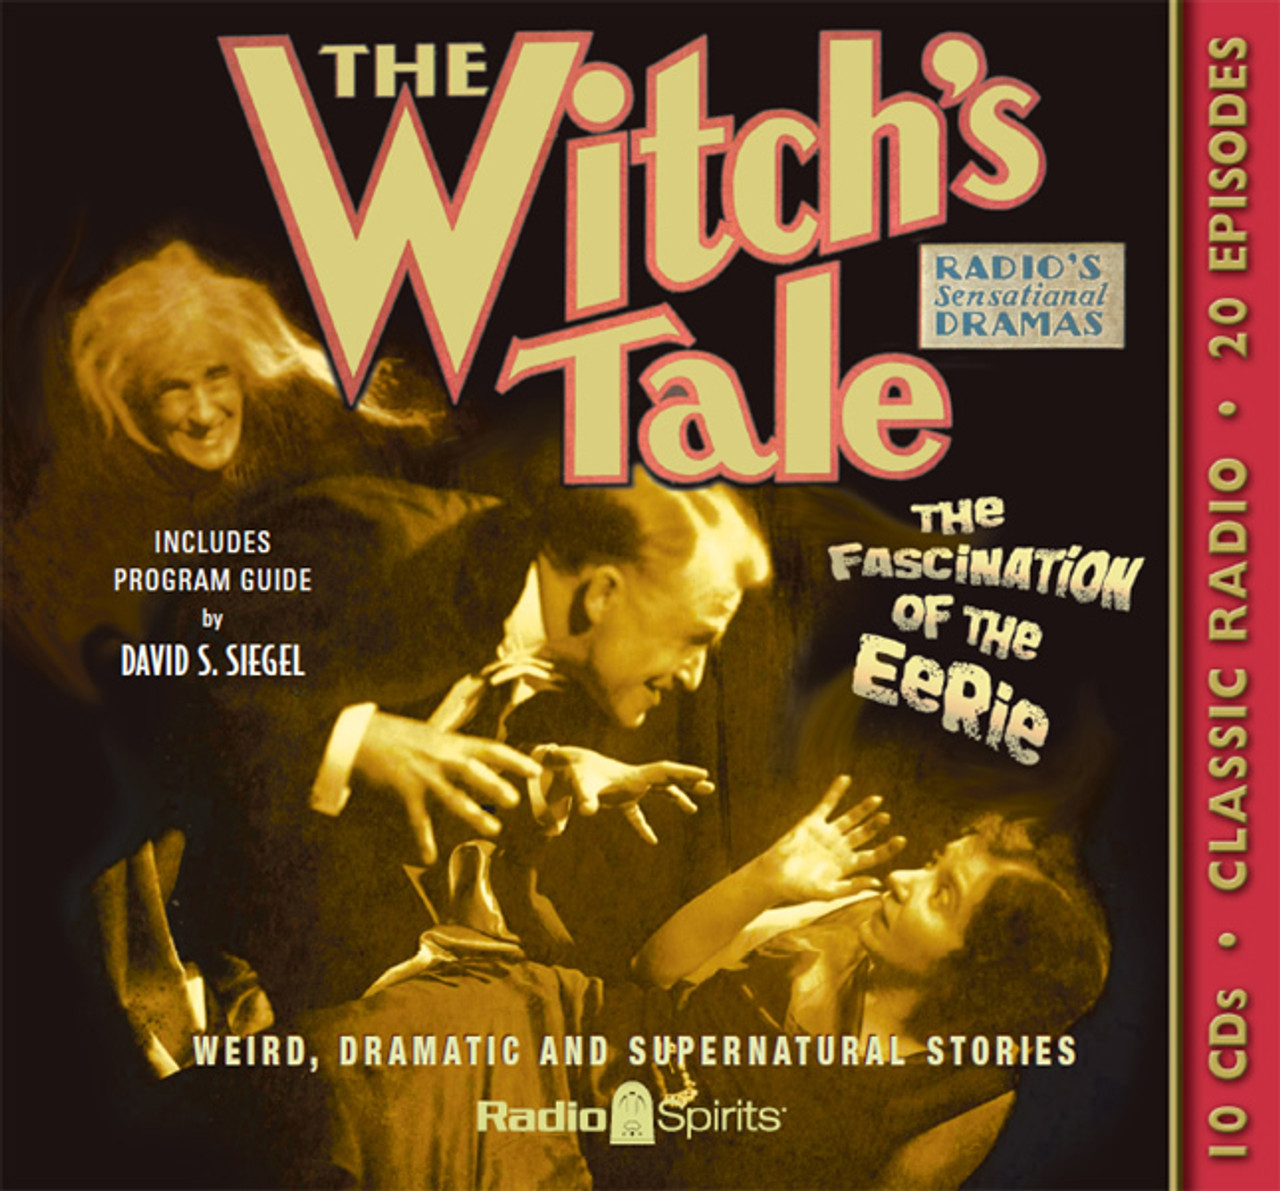 The Witch's Tale